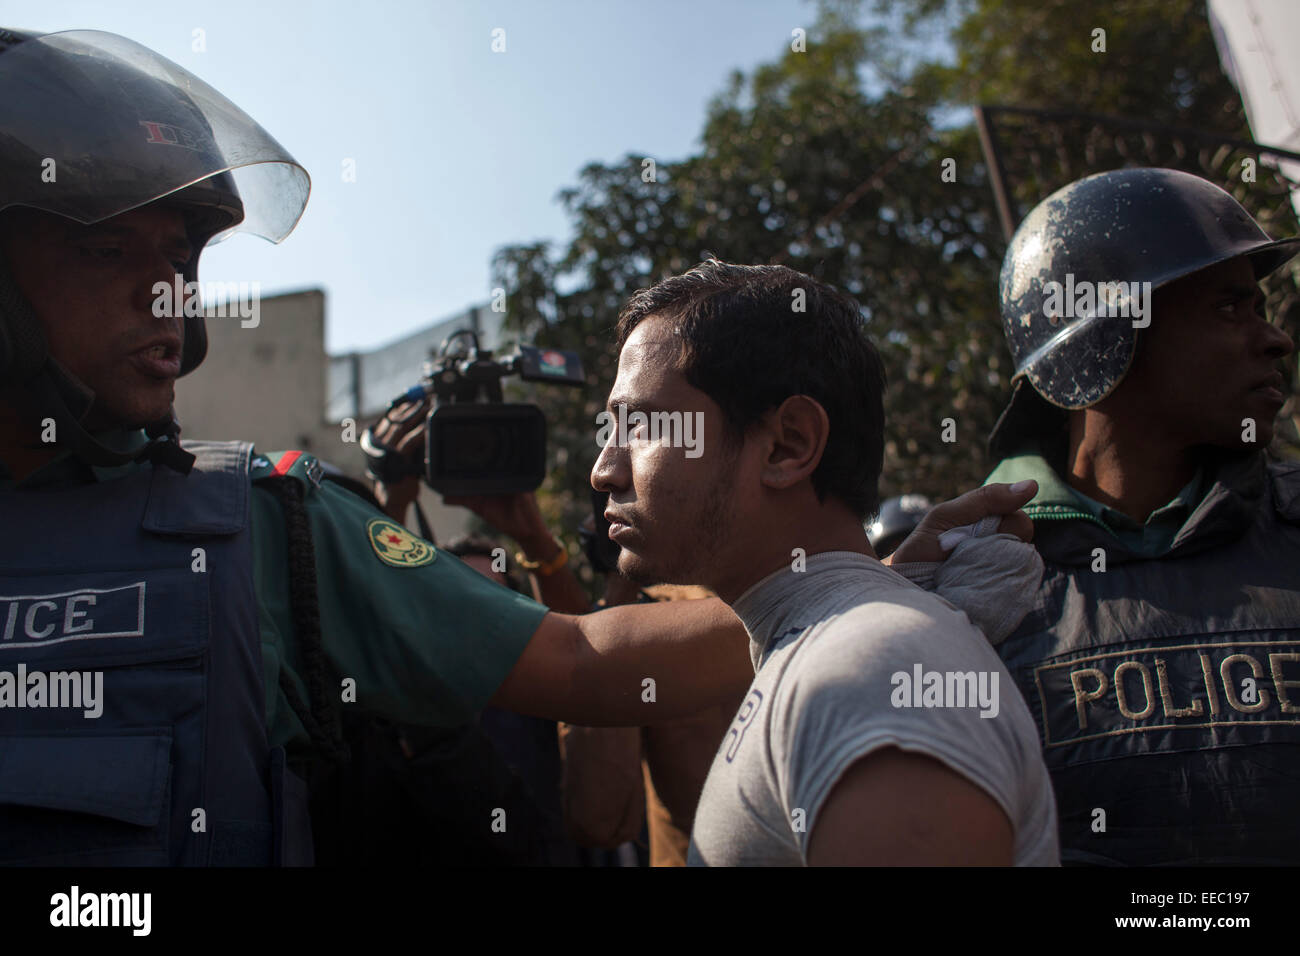 Dhaka, Bangladesh. 15th Jan, 2015. Bangladeshi policemen detain an activist of an Islamic political group during a protest in front of Baitul mokarram mosque in Dhaka. The protest was against the Bangladeshi Prime Minister Sheikh Hasina and former Telecommunication Minister Abdul Latif Siddique after his alleged anti-Islam comments at a rally. © zakir hossain chowdhury zakir/Alamy Live News Credit:  zakir hossain chowdhury zakir/Alamy Live News Stock Photo